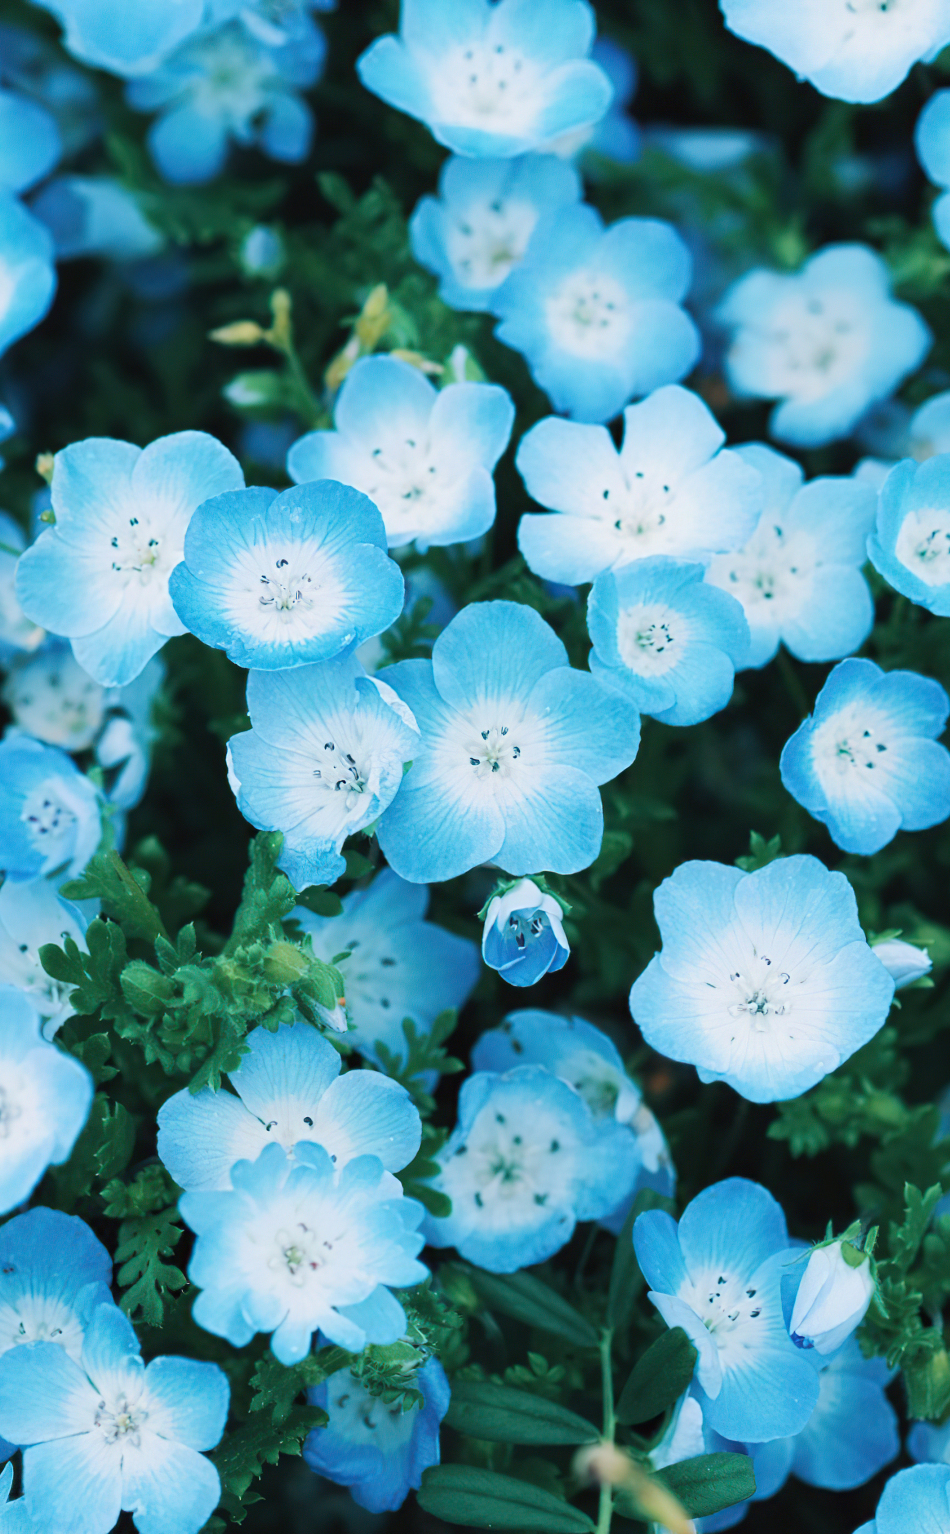 Download wallpaper 950x1534 blue flower, tiny and beautiful, close up, bloom, iphone, 950x1534 HD background, 29102